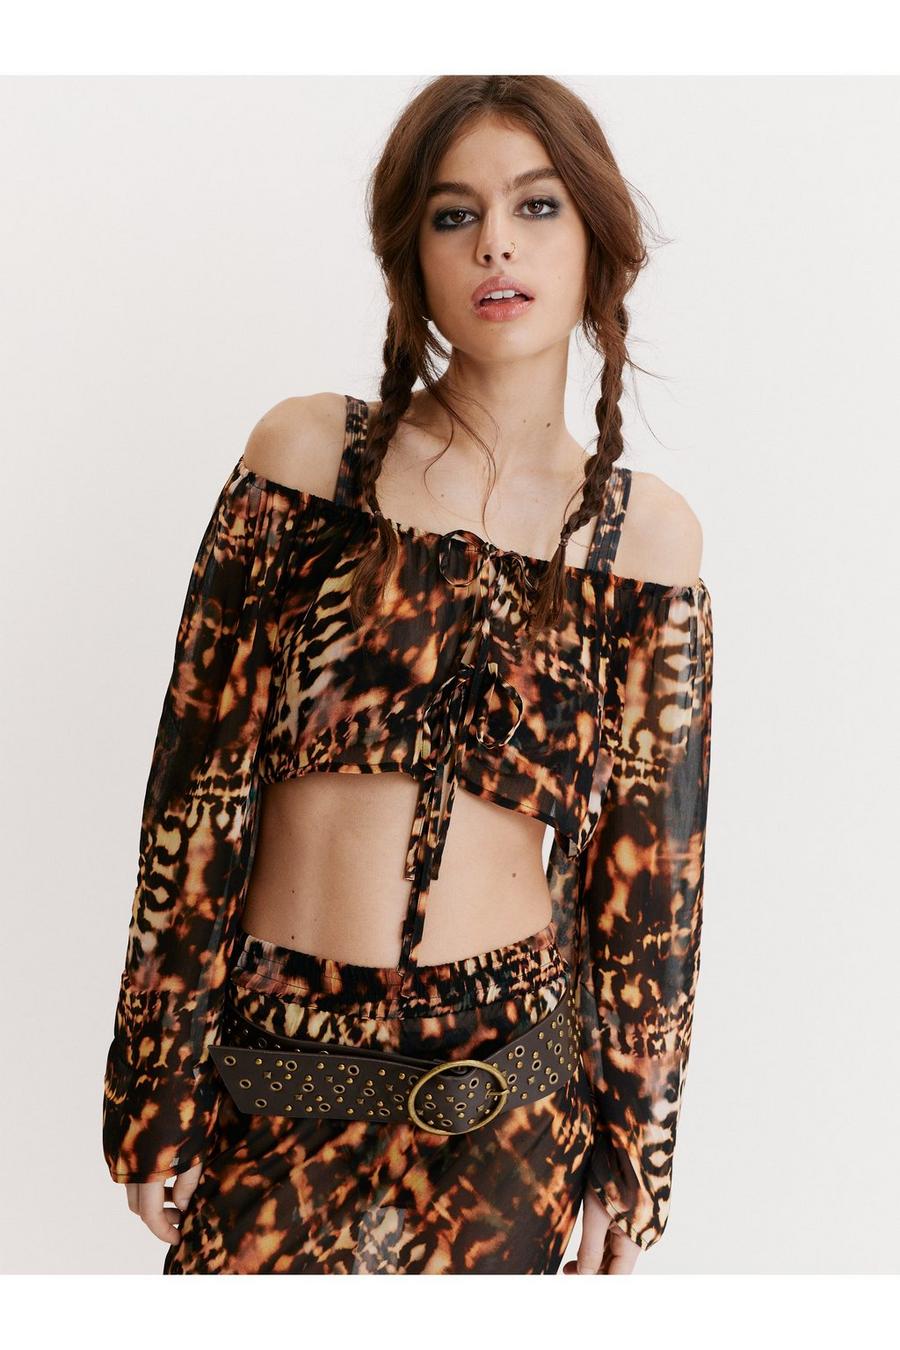 Sheer Animal Print Tie Front Beach Cover Up Top